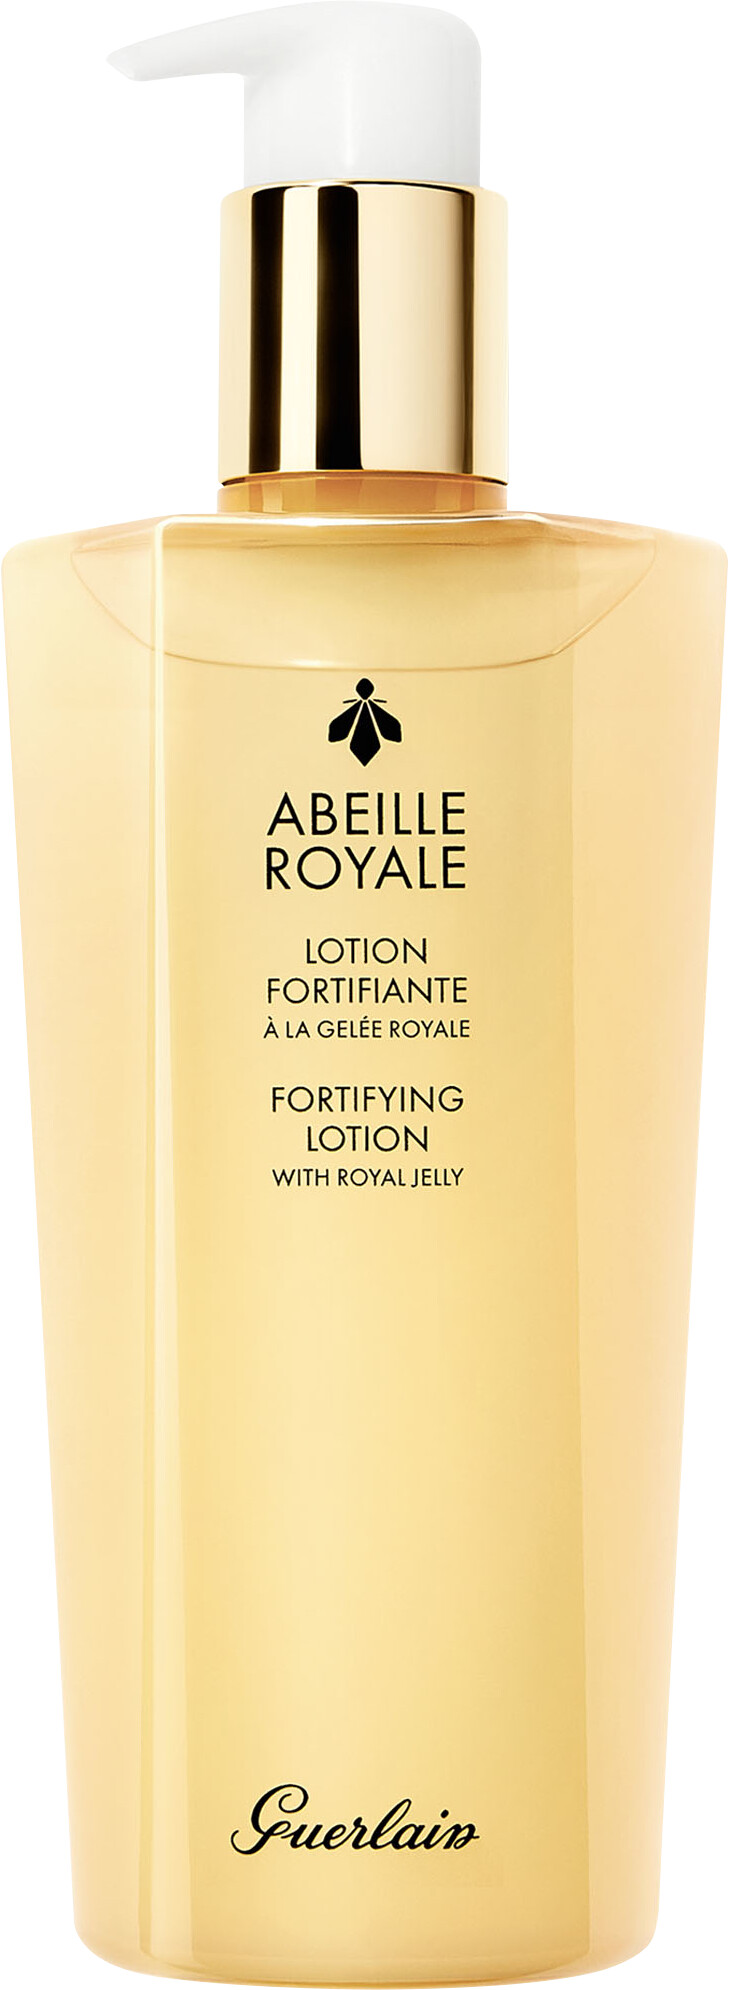 GUERLAIN Abeille Royale Fortifying Lotion With Royal Jelly 300ml